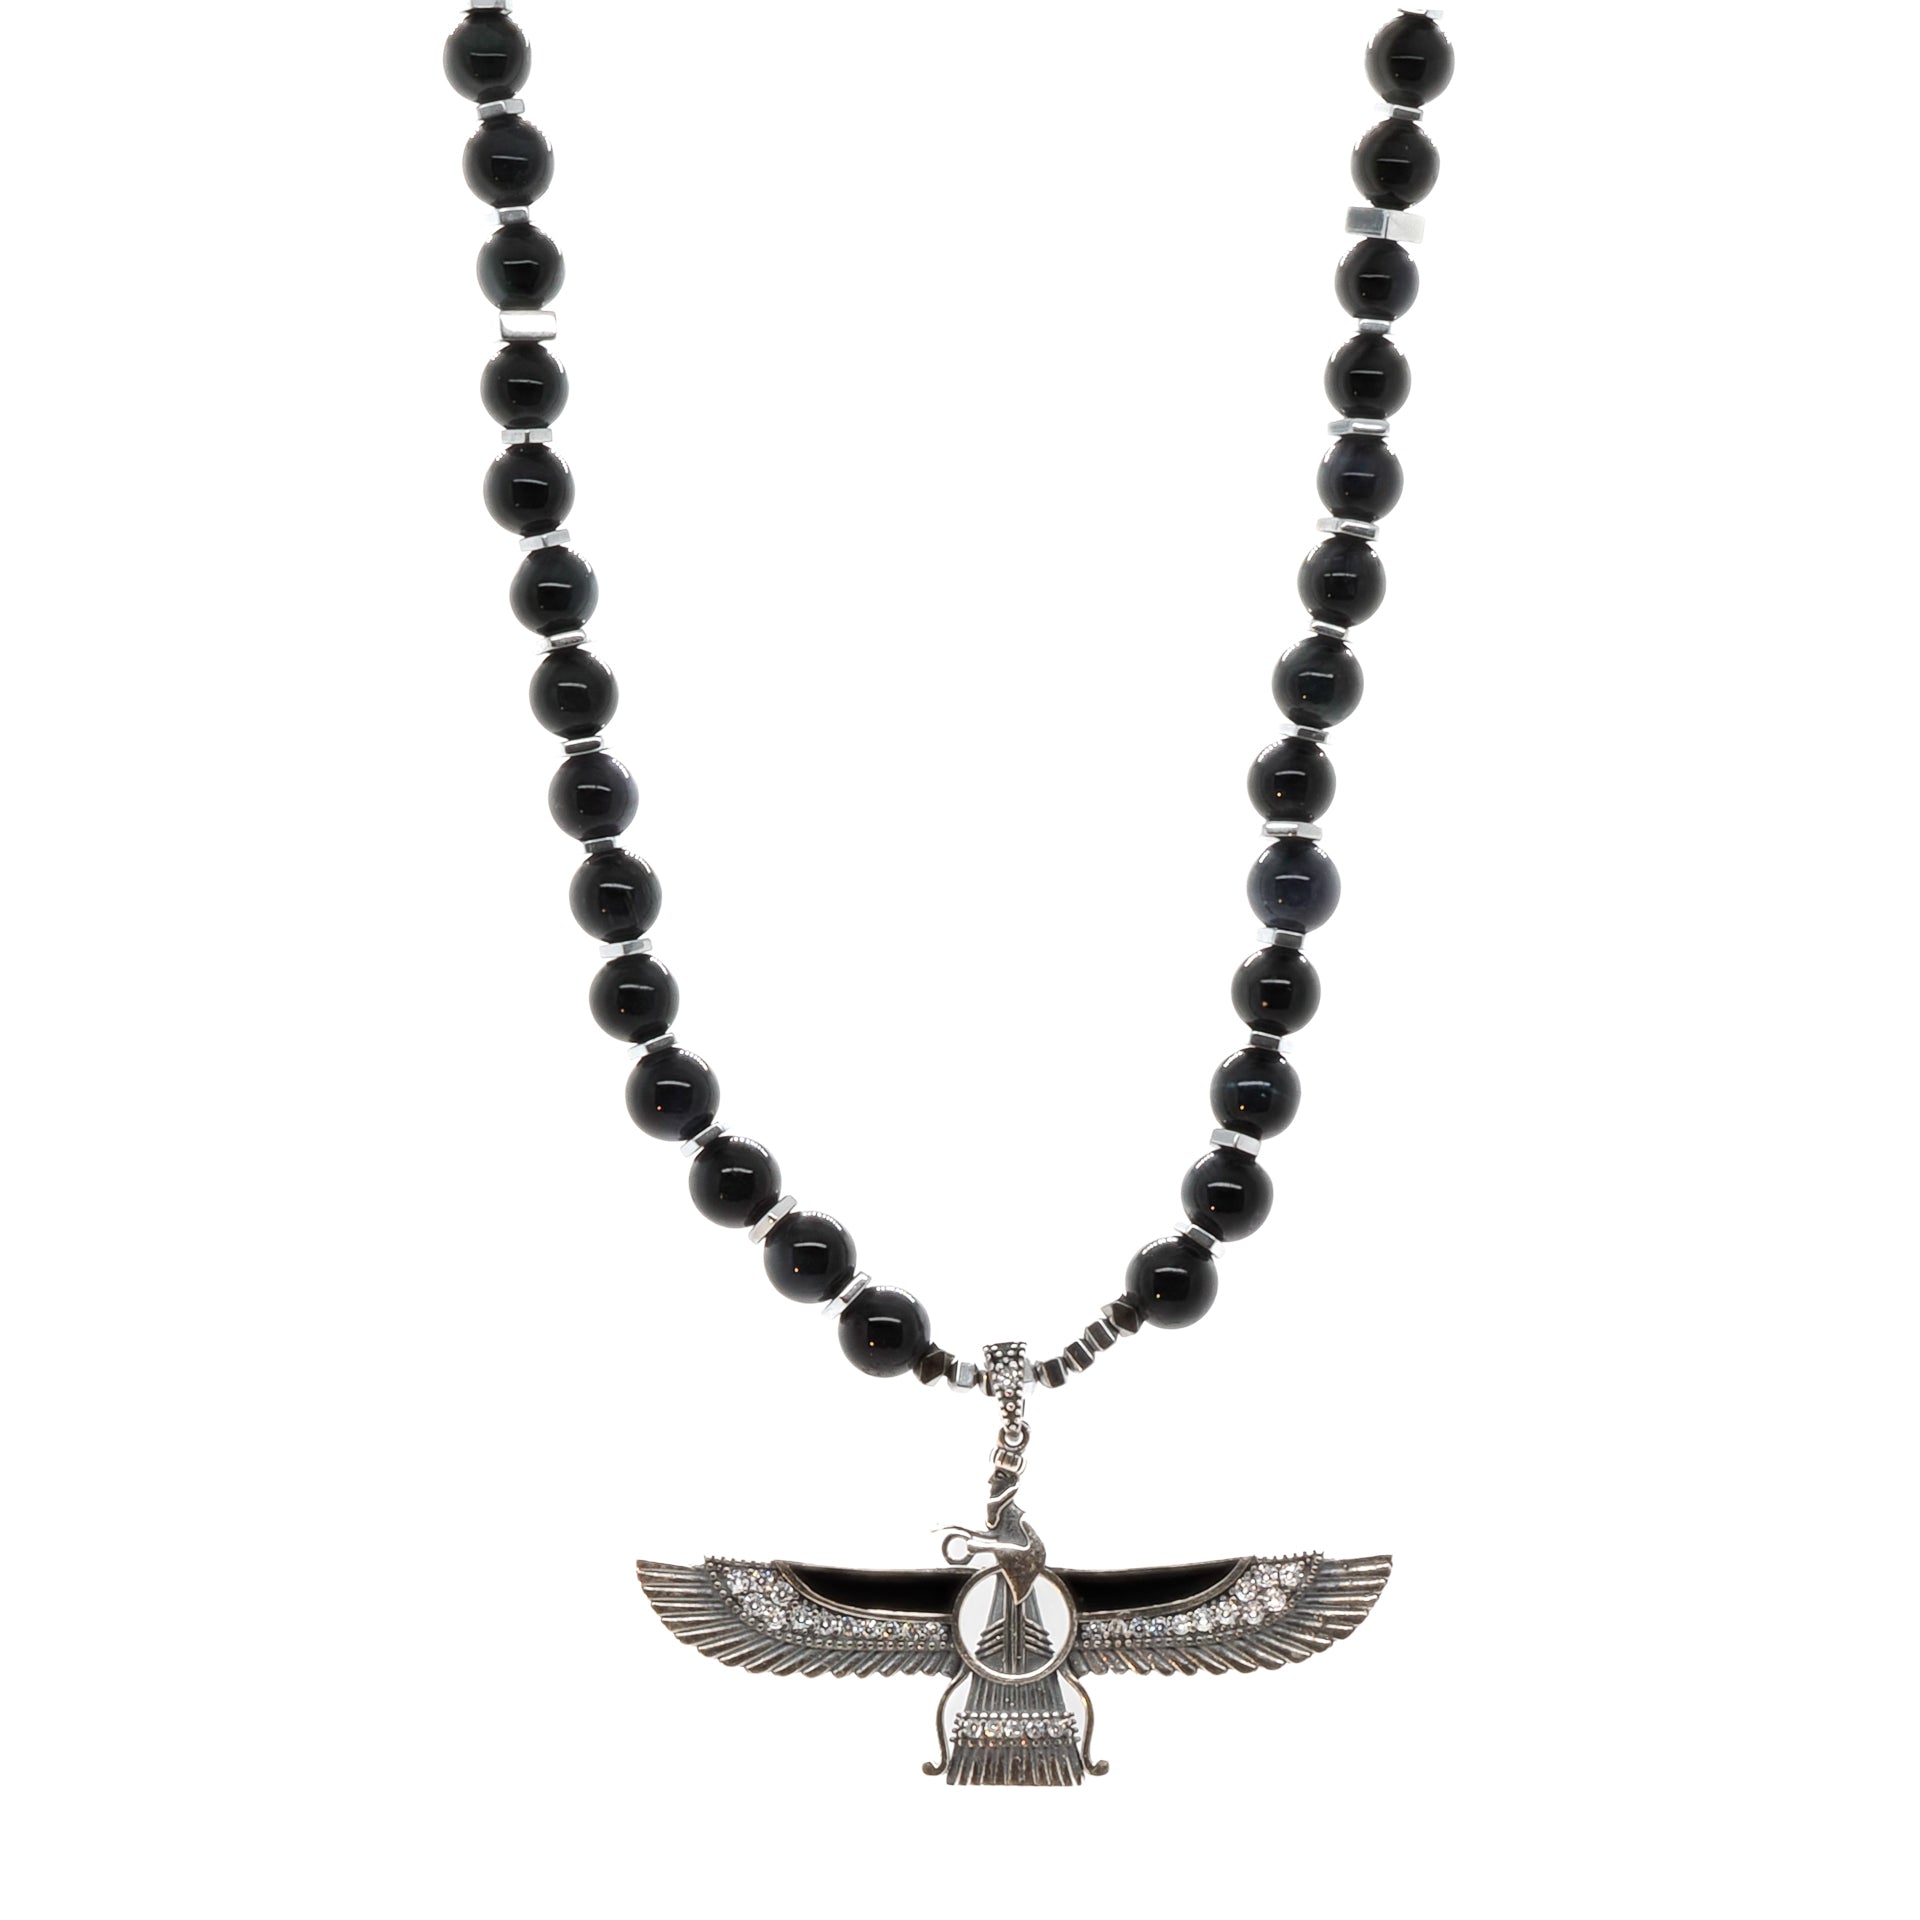 Symbolic Power - The Handmade Necklace Features a Faravahar Pendant with Tourmaline Stone Beads.